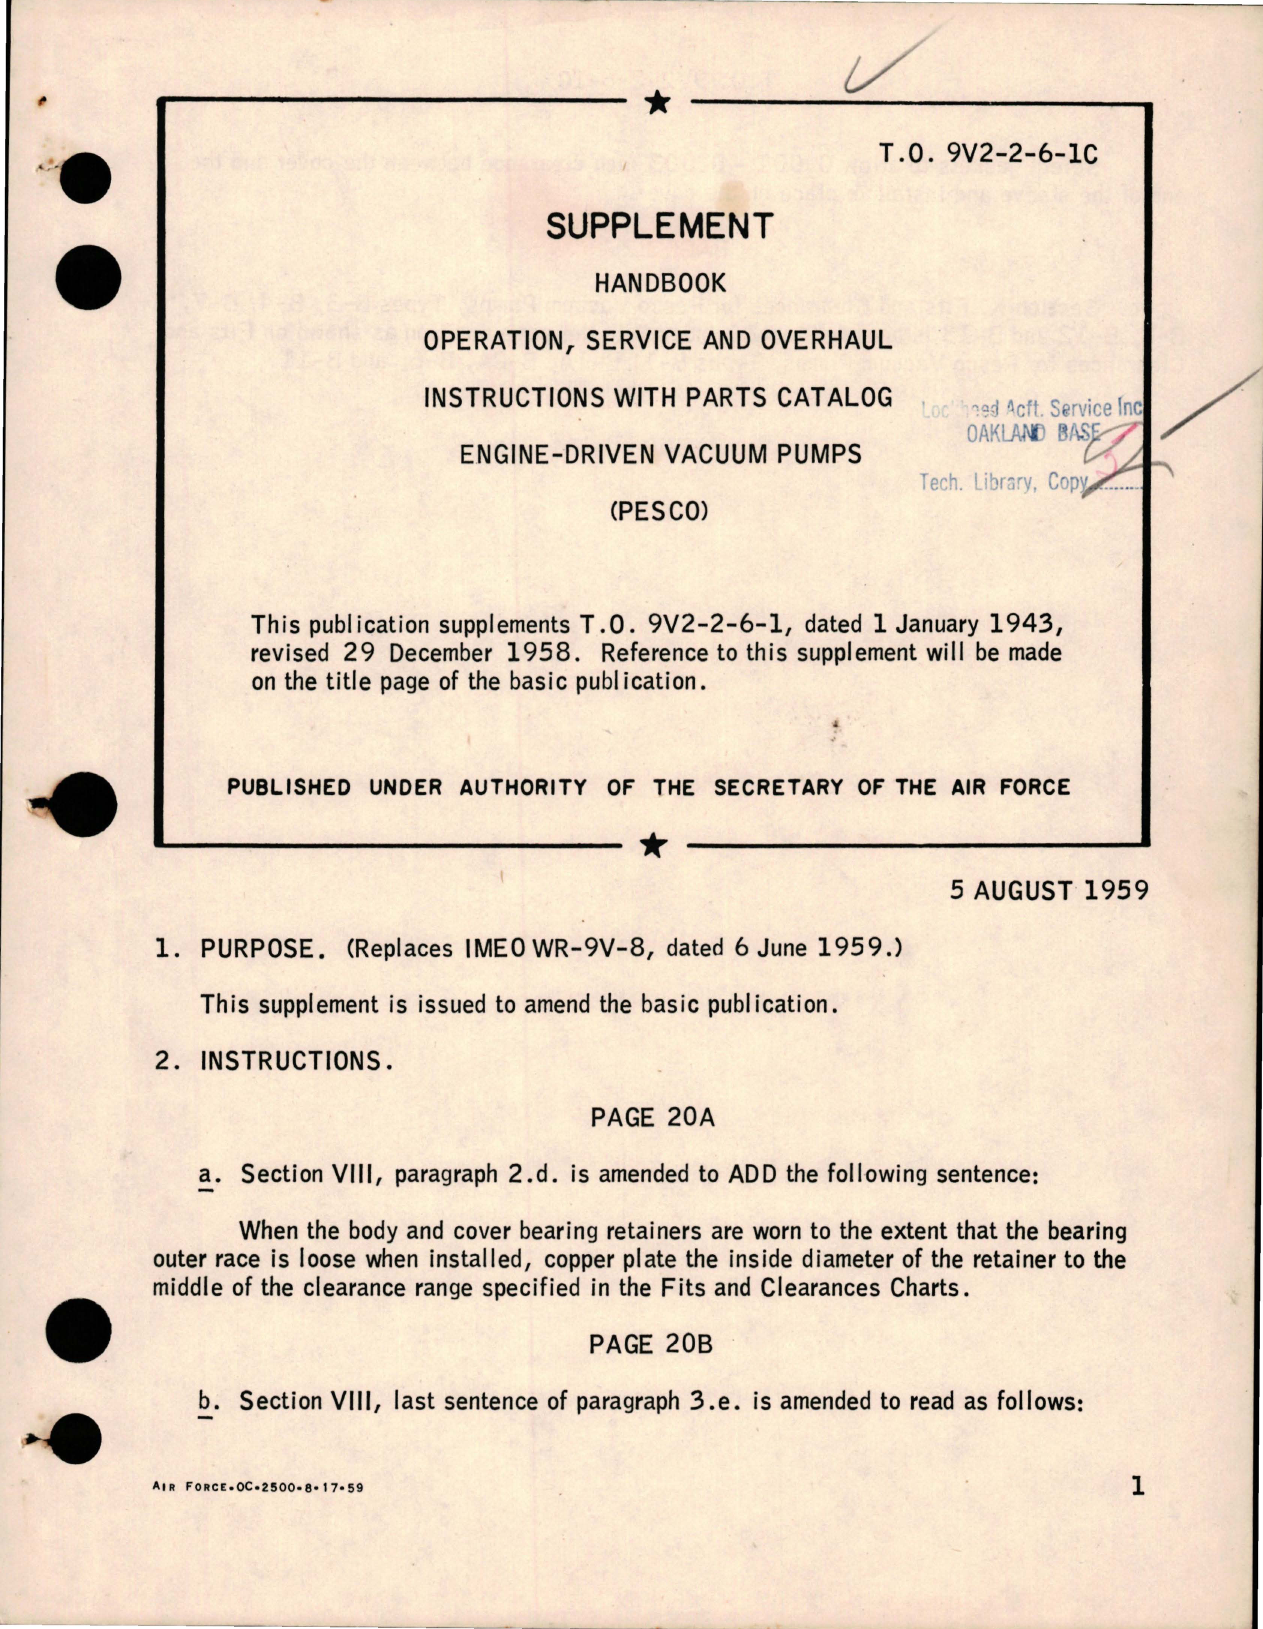 Sample page 1 from AirCorps Library document: Supplement to Operation, Service and Overhaul Instructions with Parts for Engine Driven Vacuum Pumps